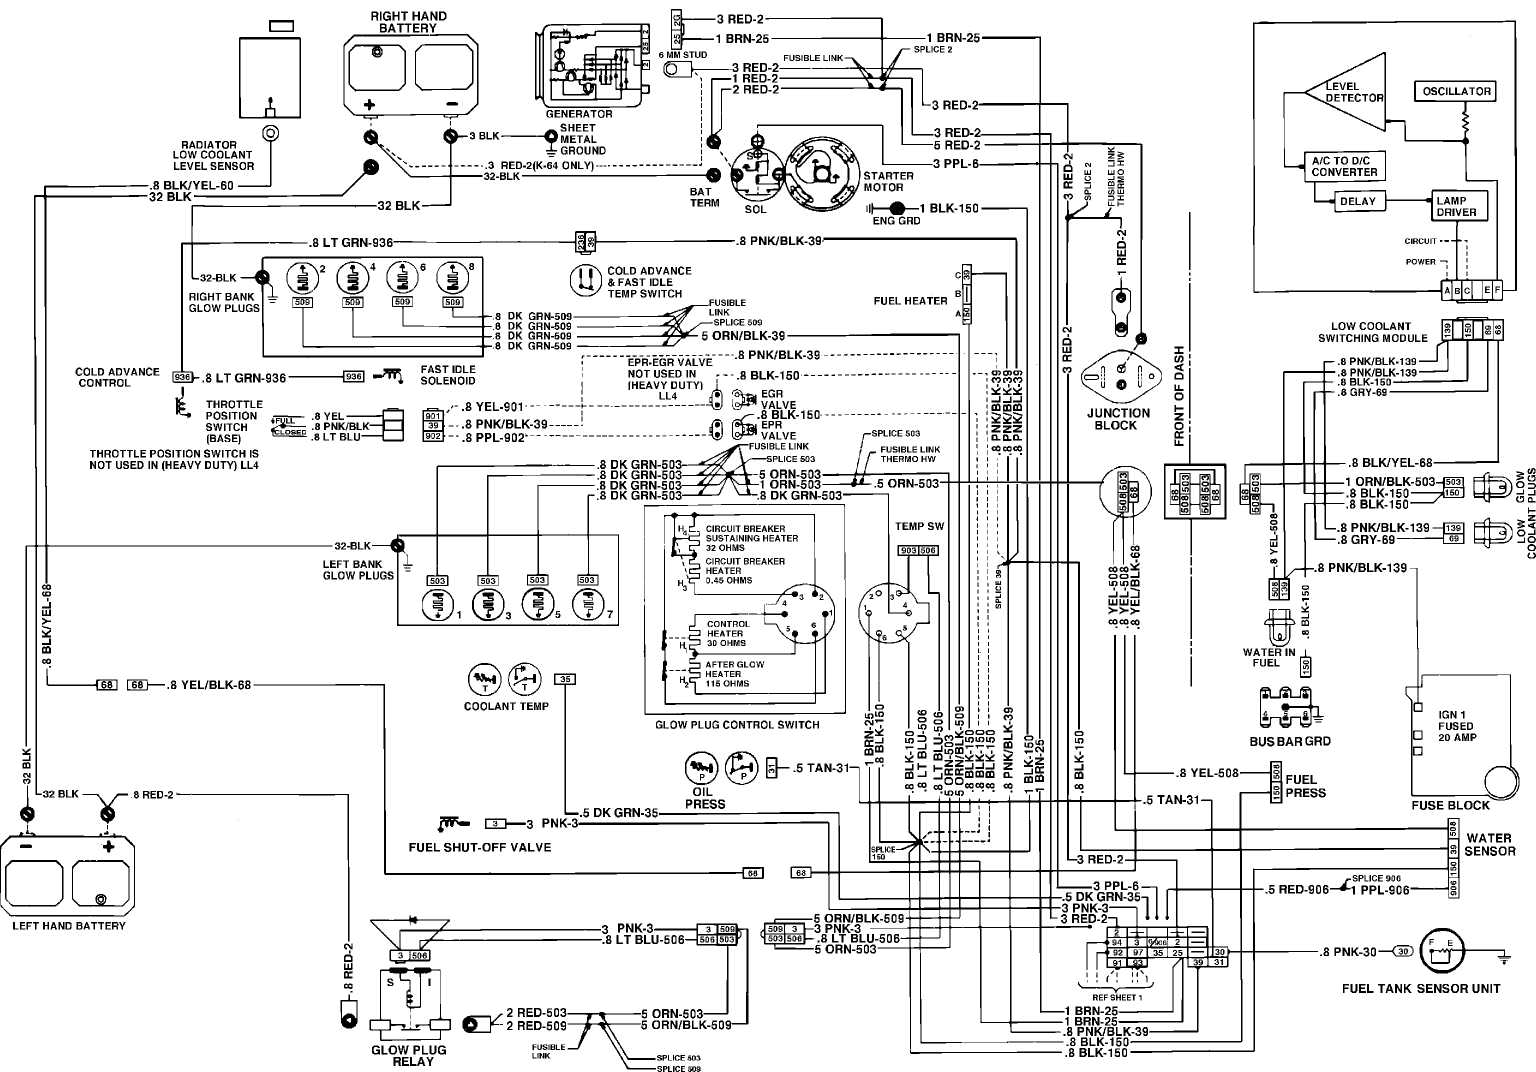 1984 Chevy Truck Wiring Diagrams submited images.